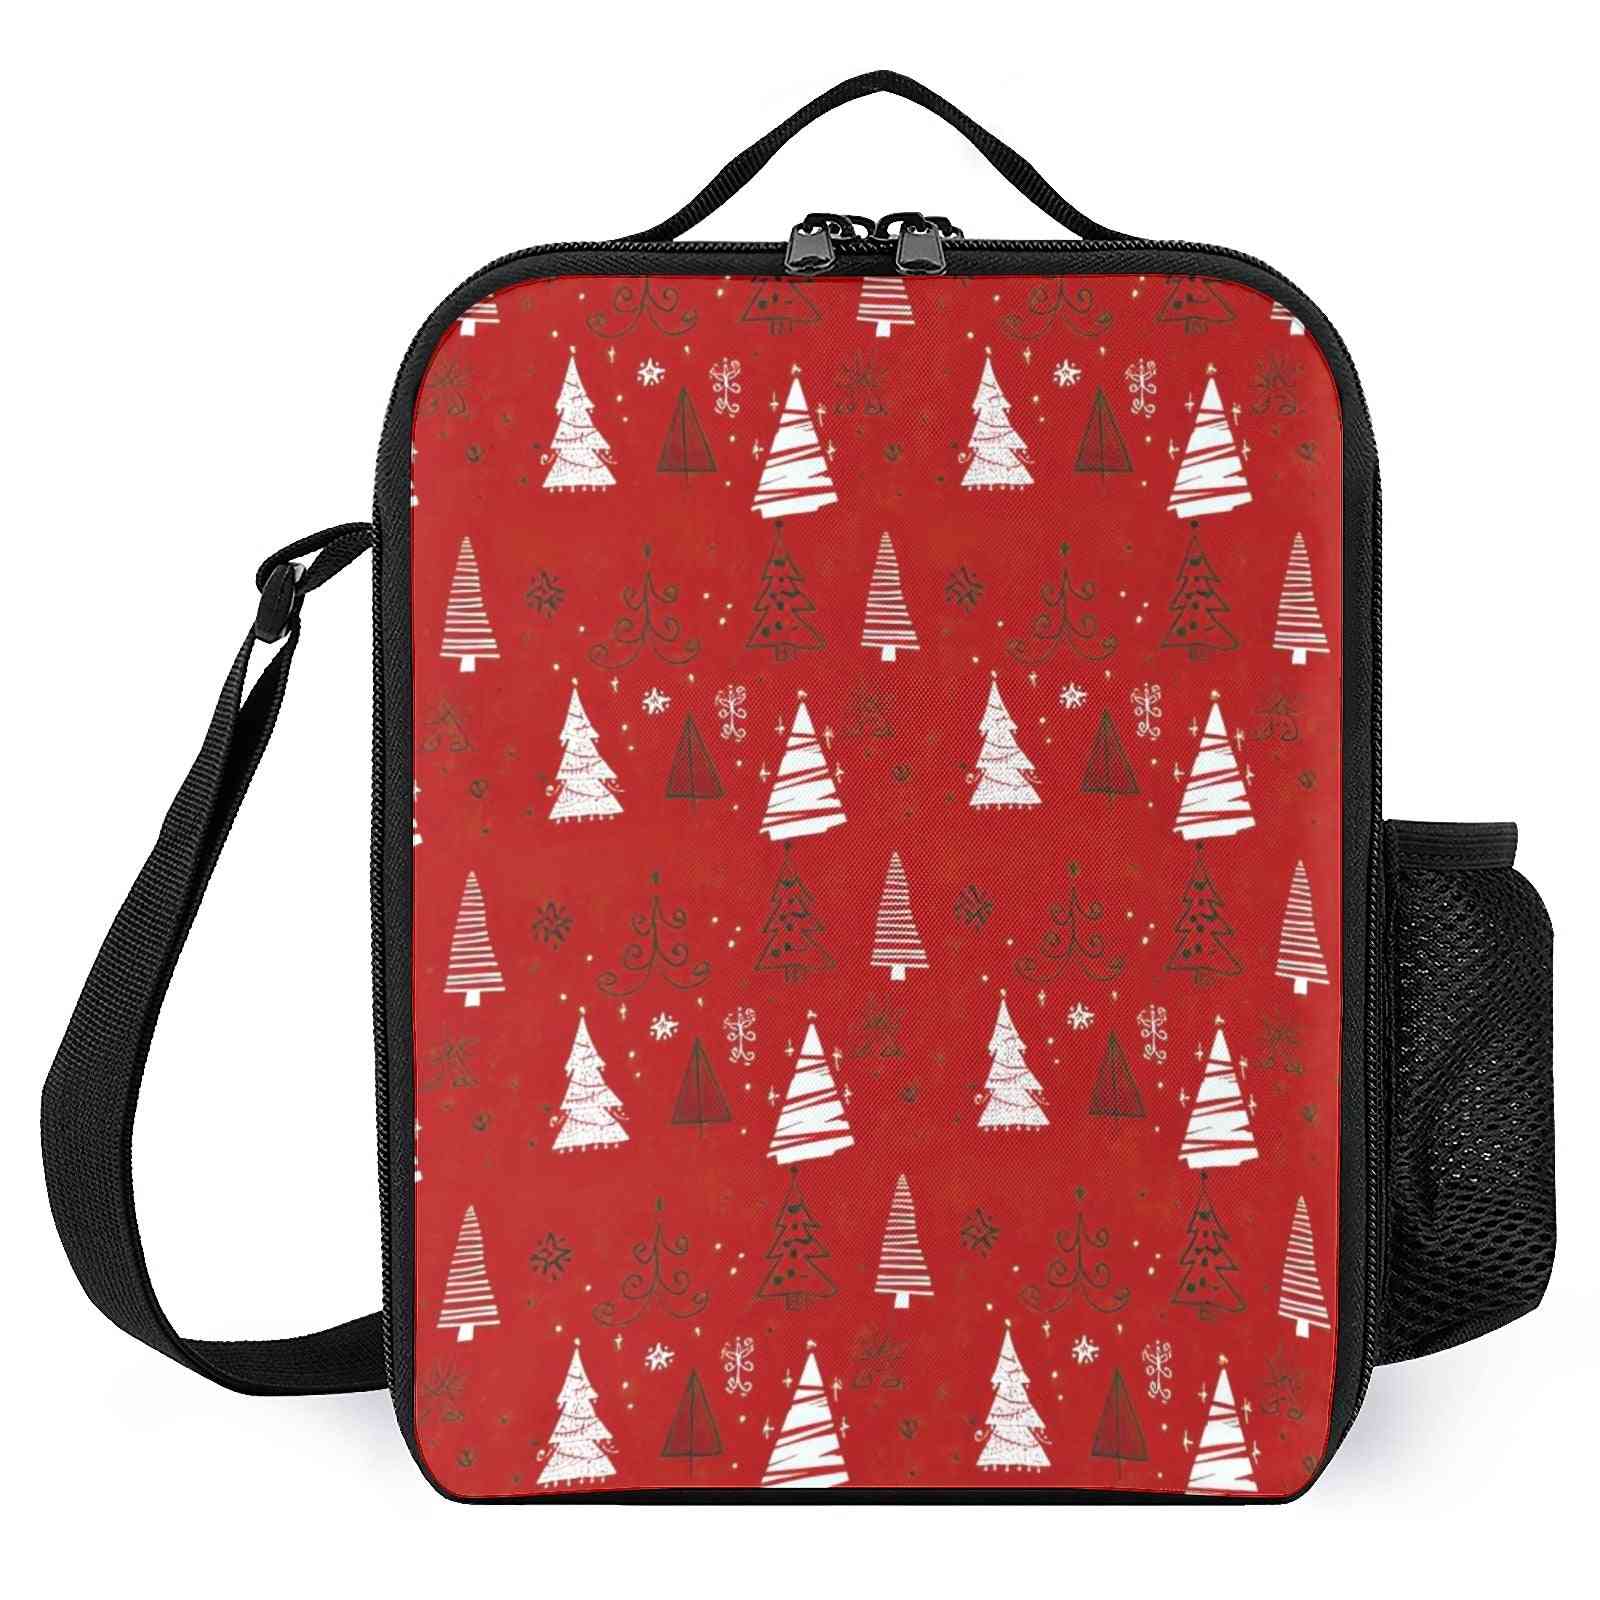 Hand Drawn Christmas Trees Pattern Printed Lunch Bags